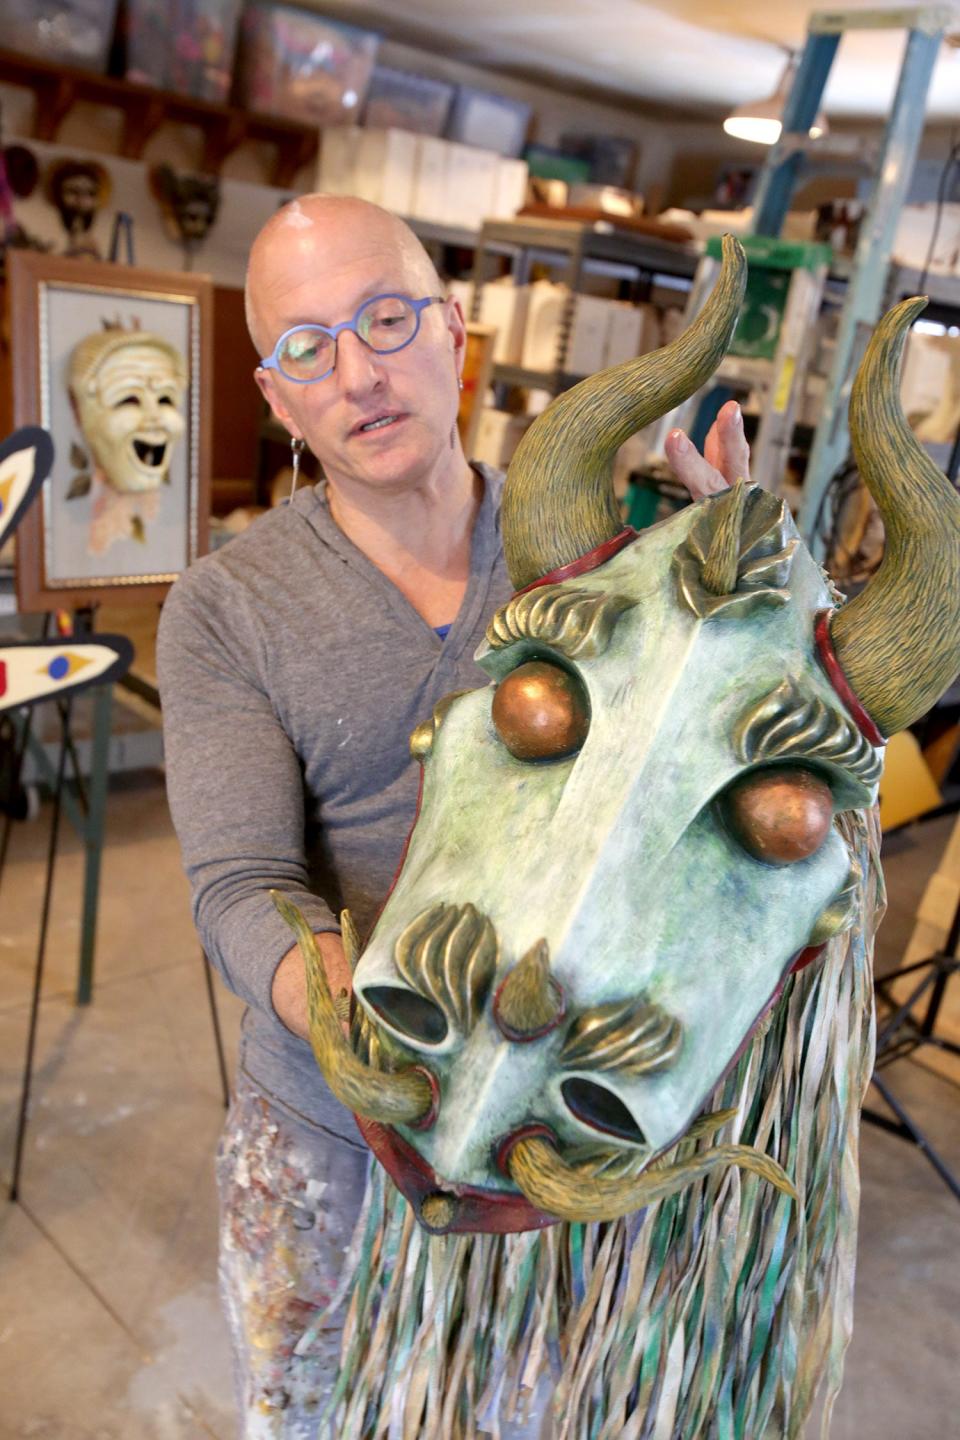 Jonathan Becker, a Canton-based theater mask artist, will be performing at 7 p.m. Friday at EN-RICH-MENT Fine Arts Academy in Canton.